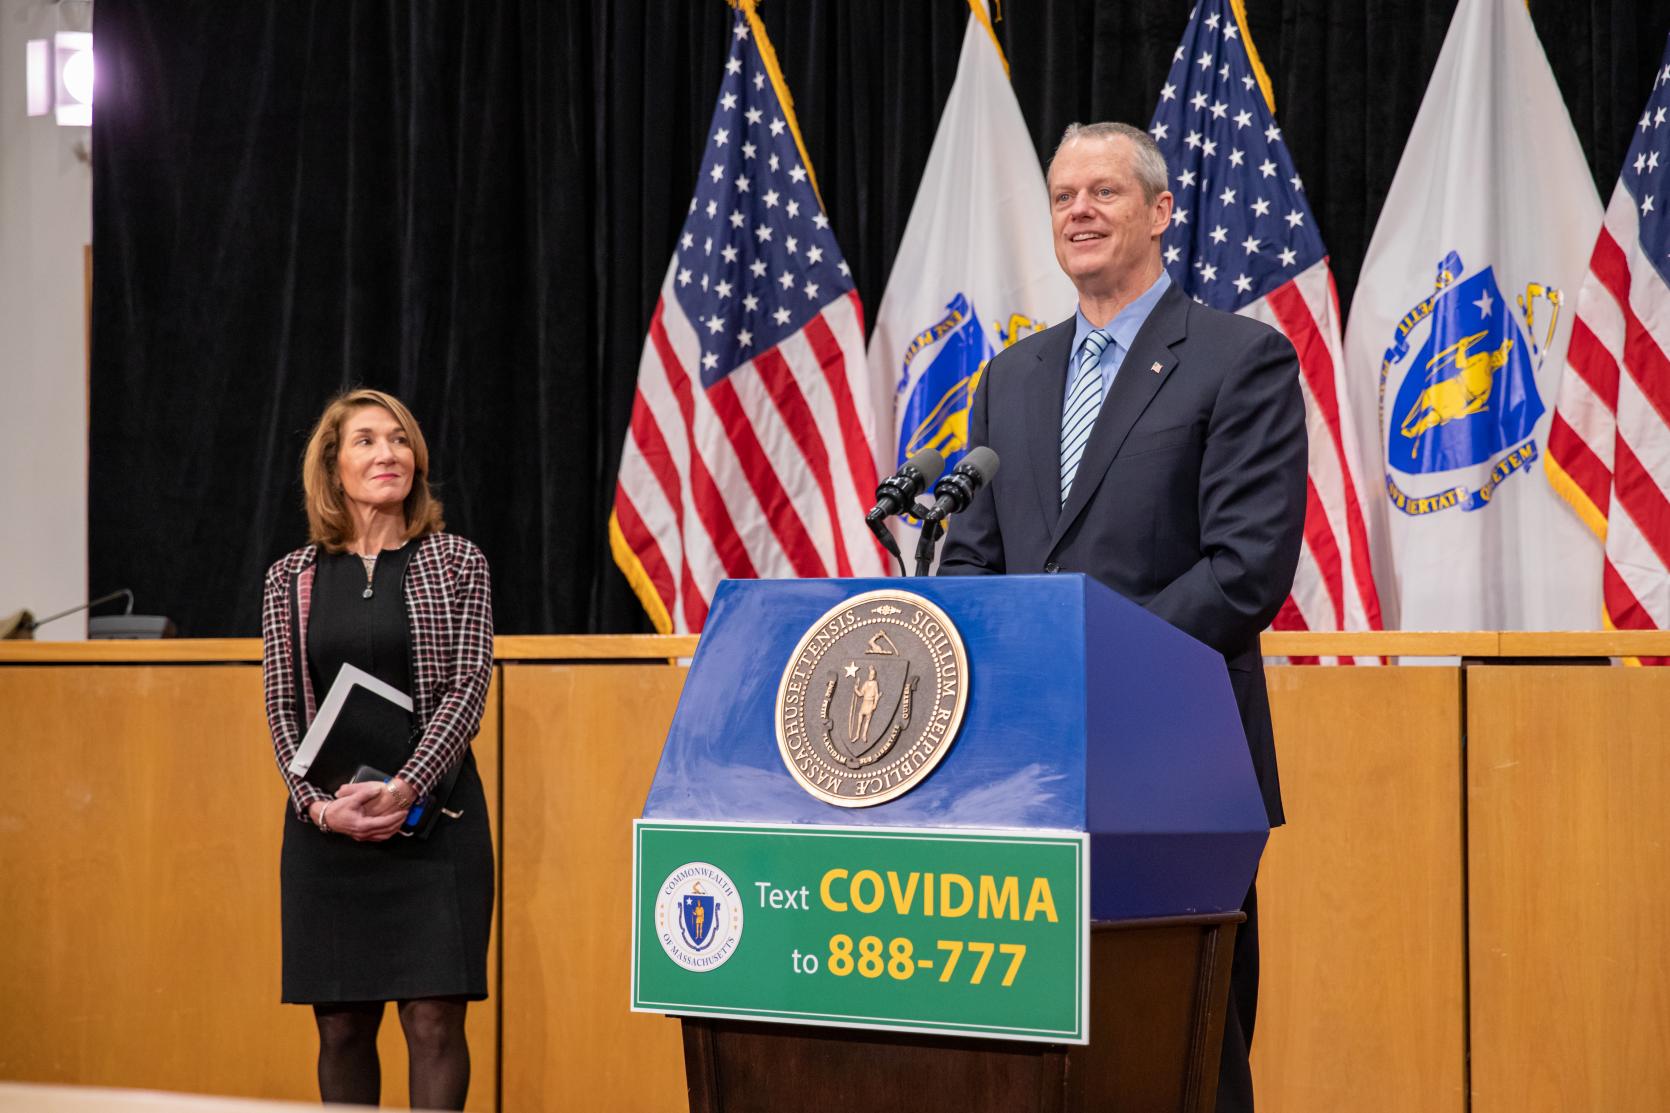 Baker-Polito Administration Announces Extension of School and Non-Emergency Child Care Program Closures and Steps to Ensure Housing Stability To Support COVID-19 Response